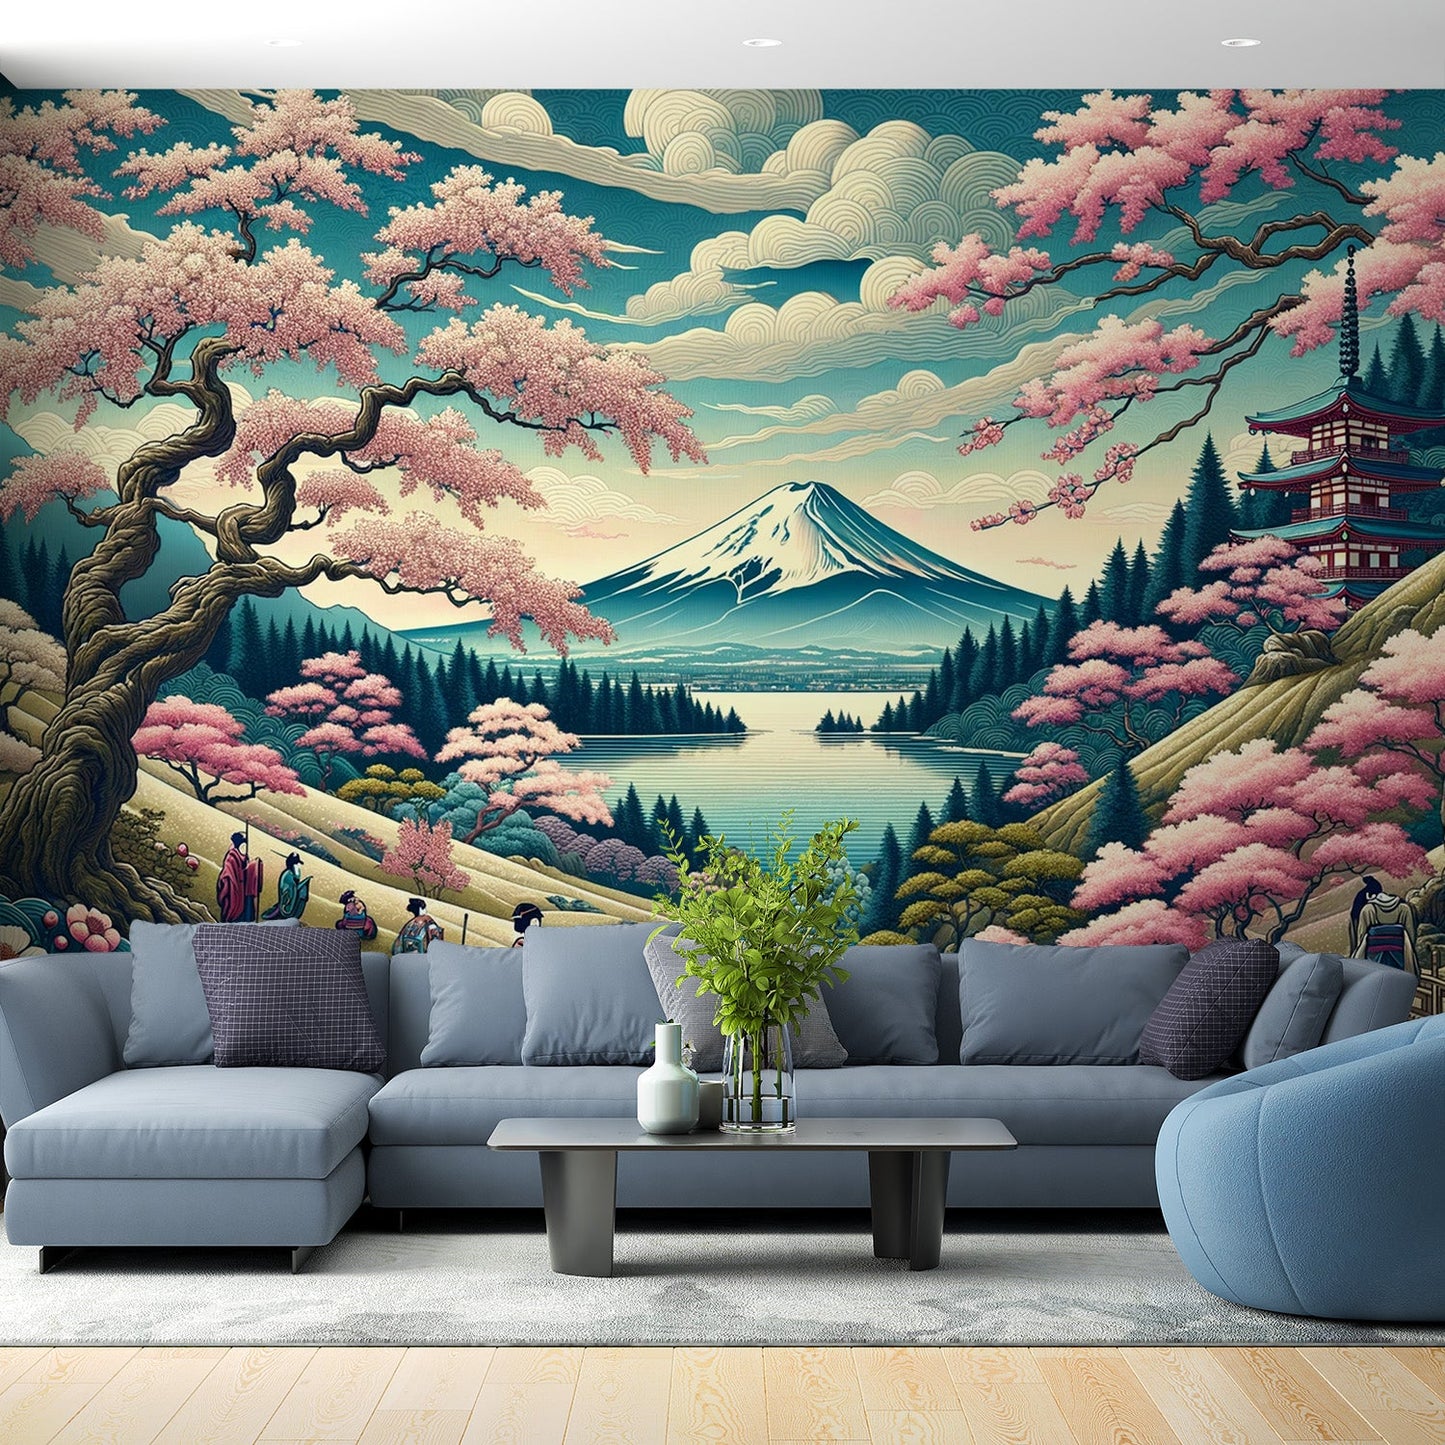 Japanese Wallpaper | Colourful Illustration of Mount Fuji and Mountain Life in Japan